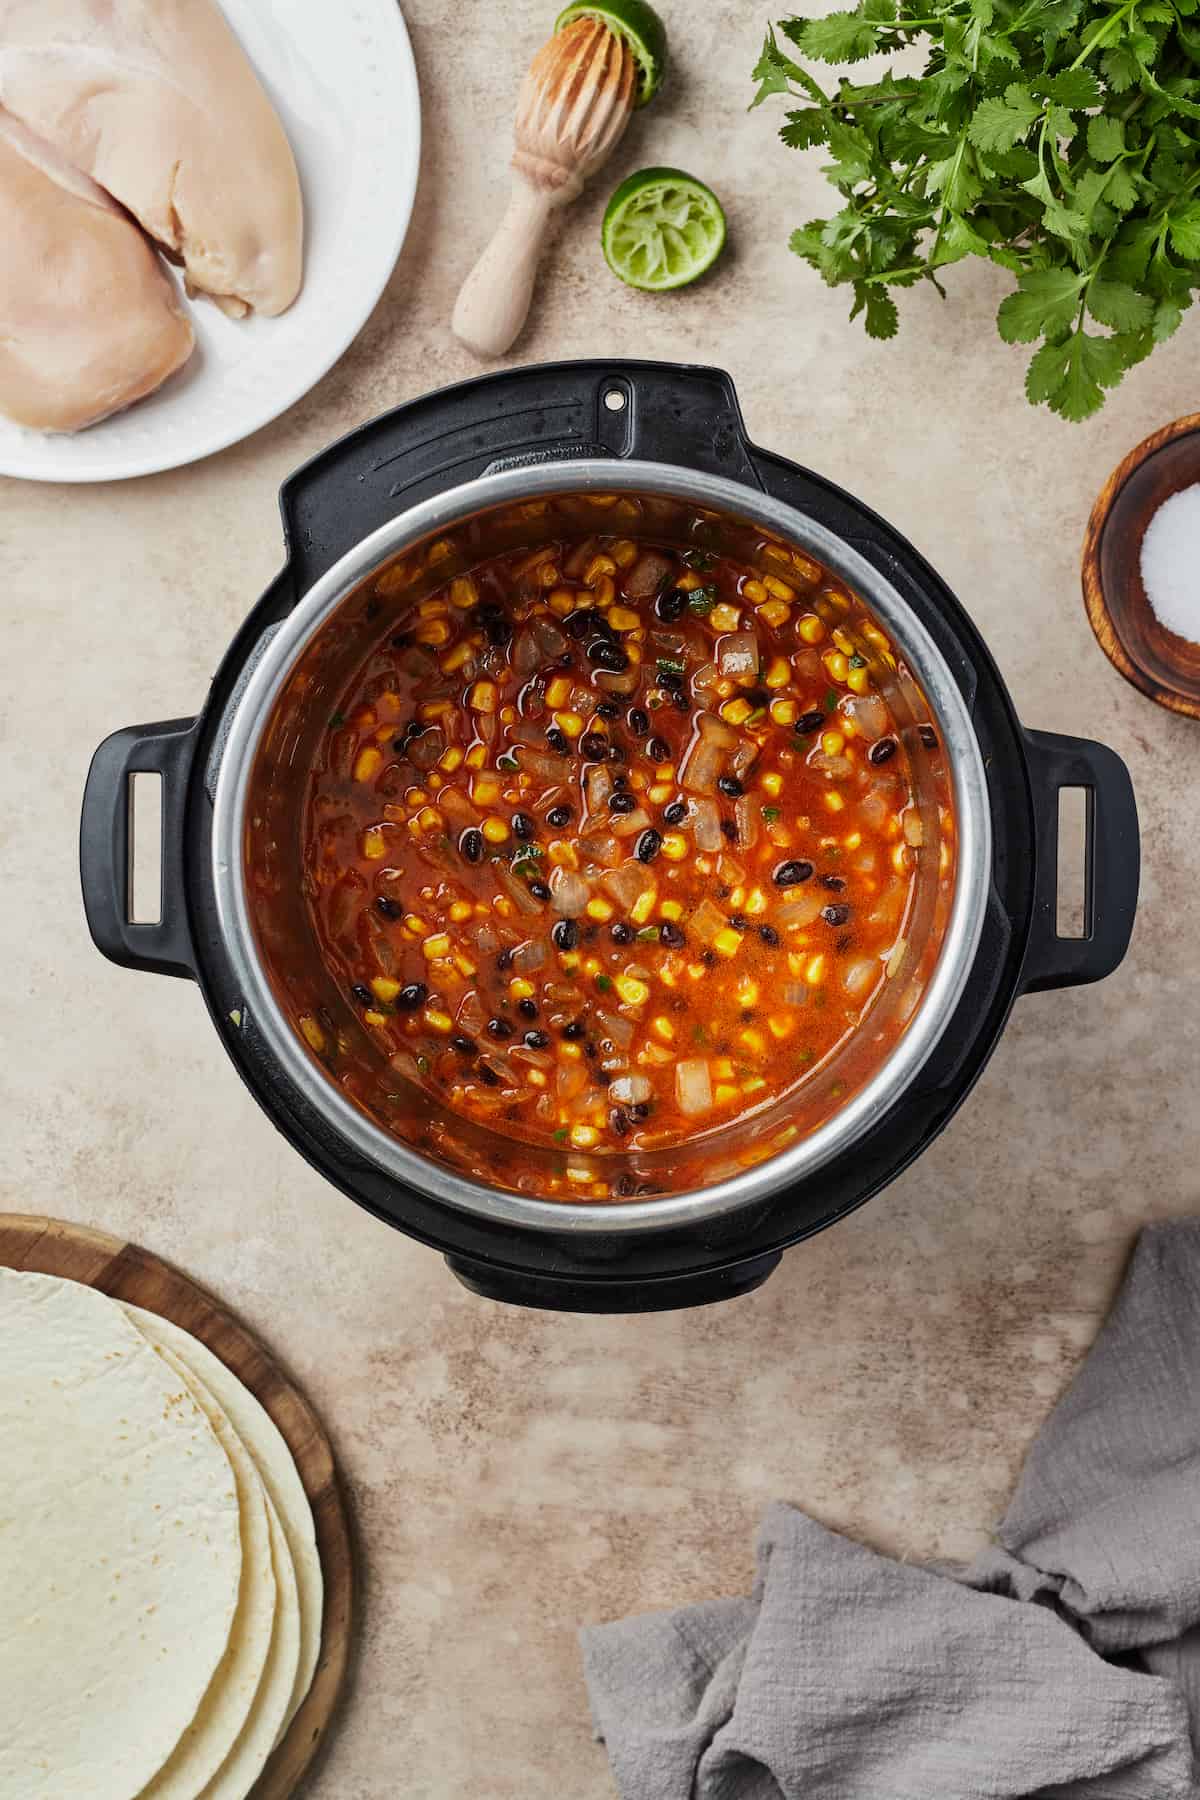 Vegetables, beans, and other ingredients in an Instant Pot.